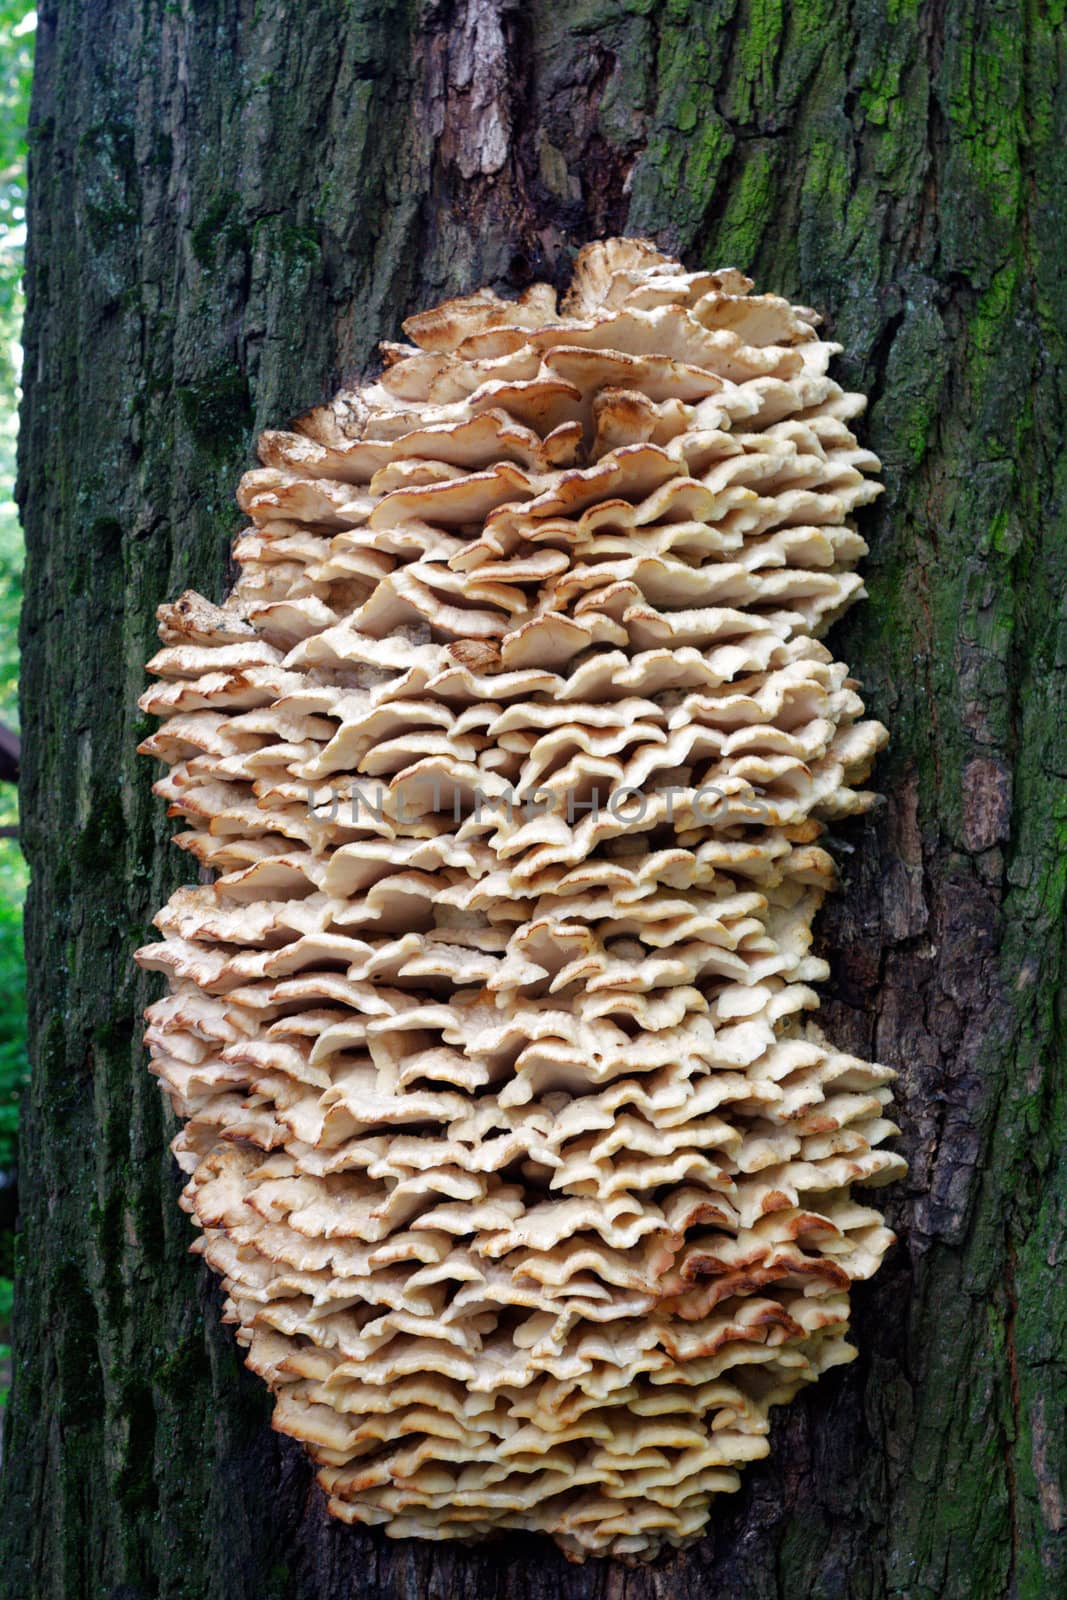 Detail of a fungus growing on the side of a tree